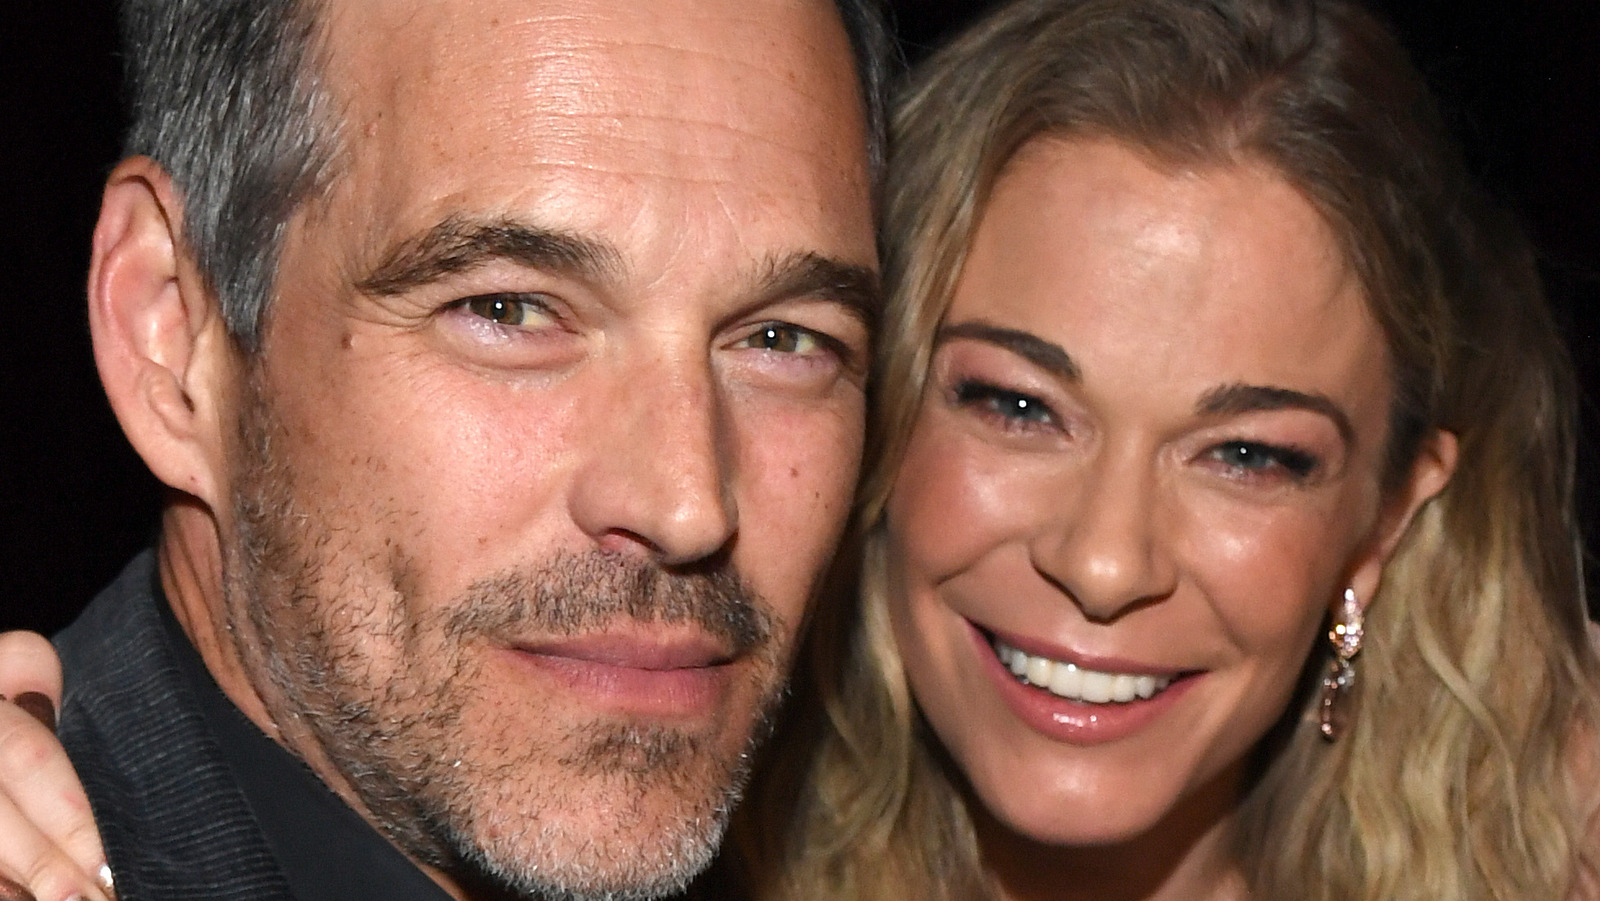 Here's What Eddie Cibrian And LeAnn Rimes' Relationship Is Like Now